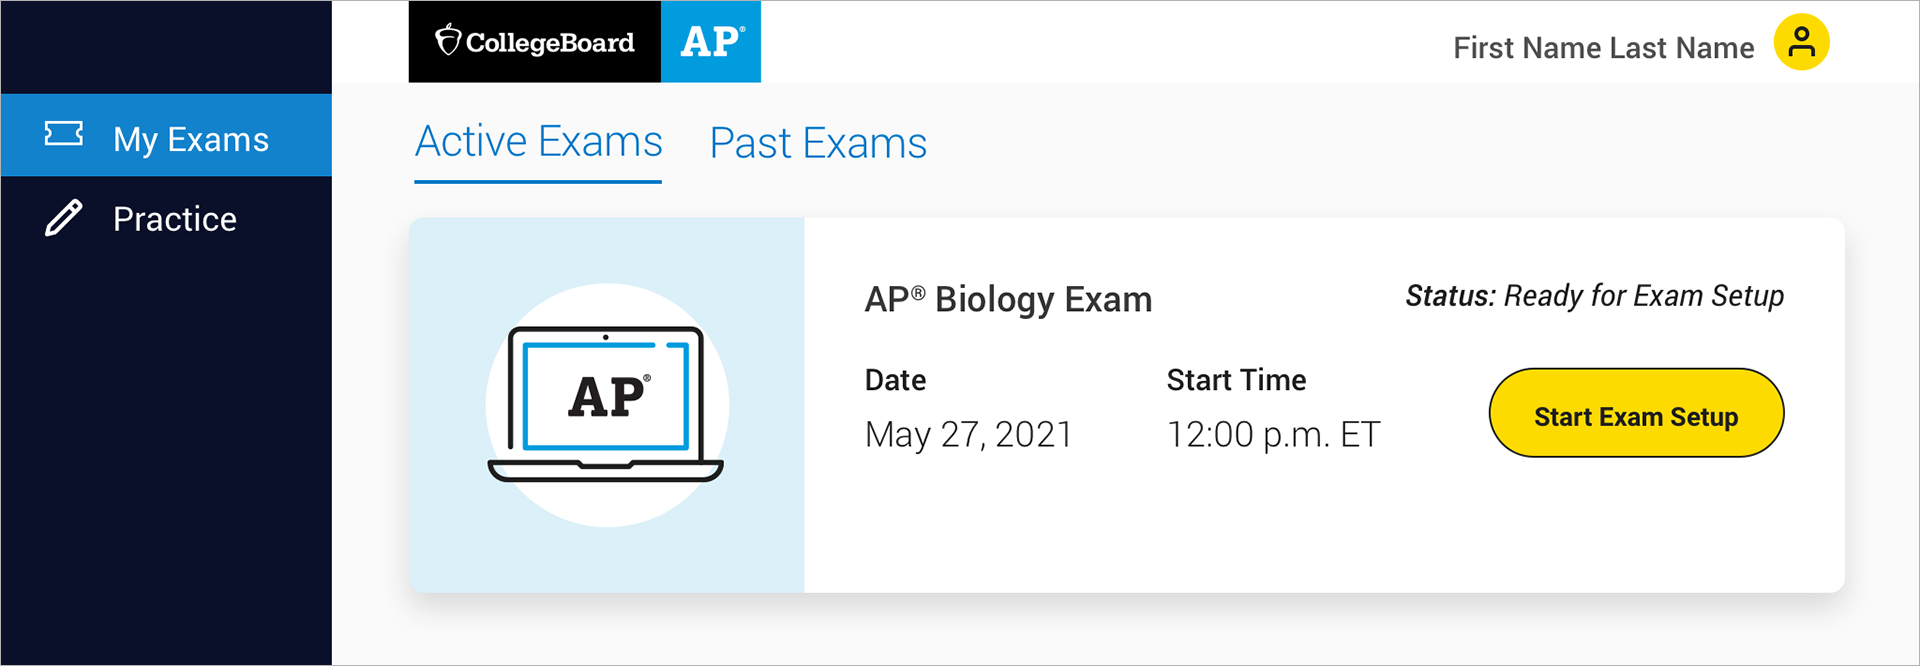 Troubleshooting for 2021 Digital AP Exams AP Students